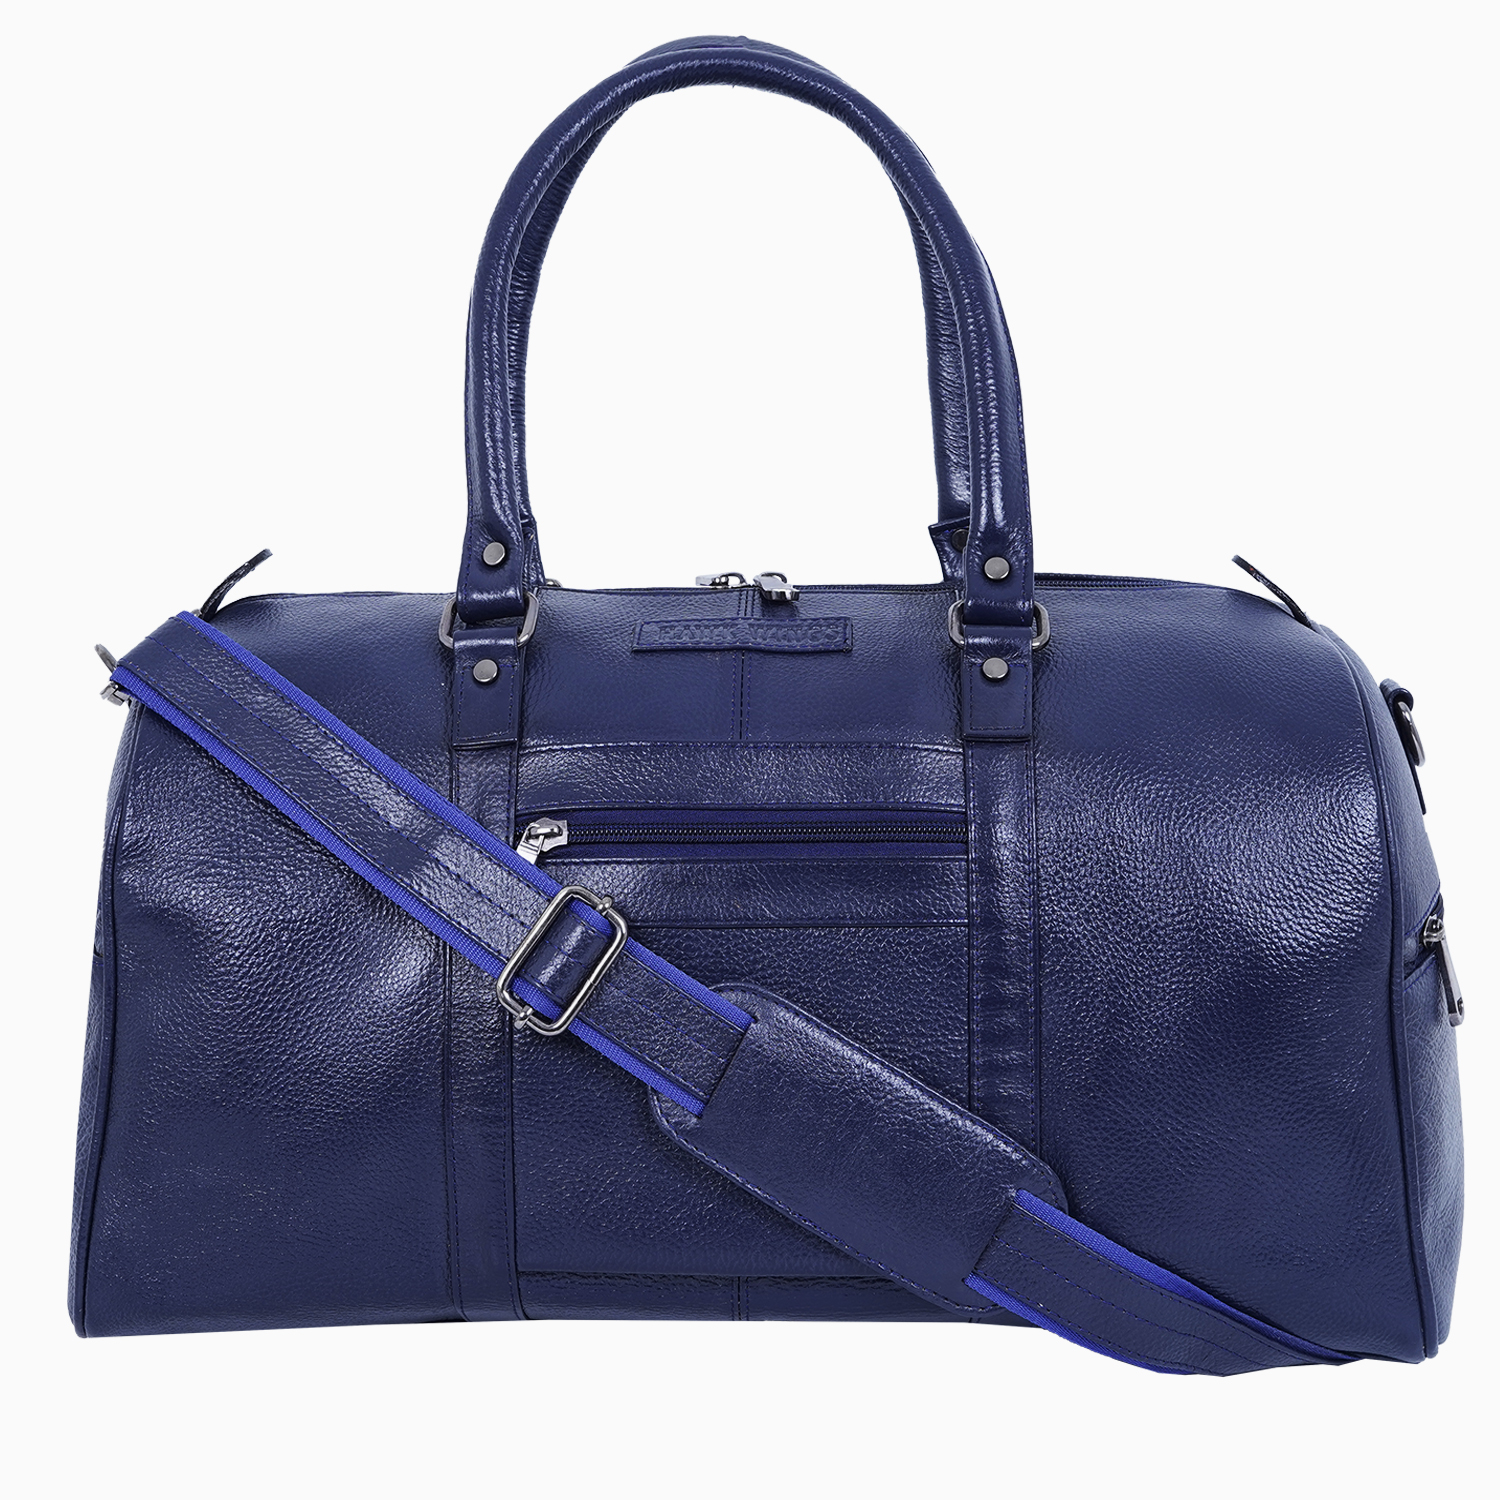  Leather Travel Duffle Bag for Men Women - Leather Duffel Carry on Overnight Weekender Bags (Blue)-asset-201